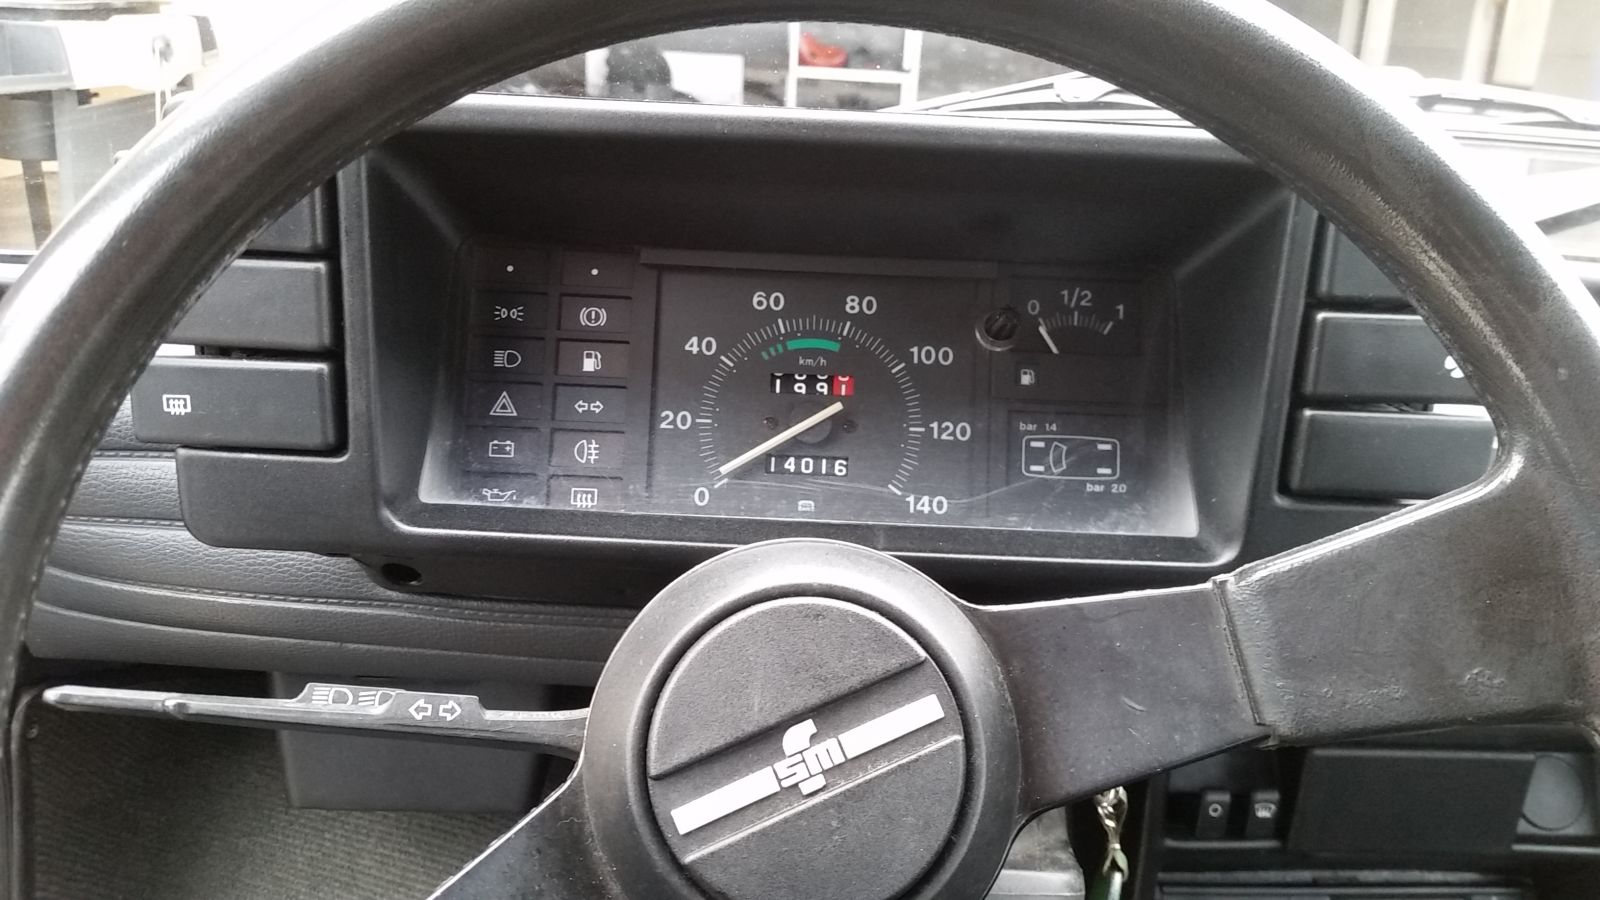 FIAT 126p FL cluster with the tire pressures listed at the bottom-right in BAR.